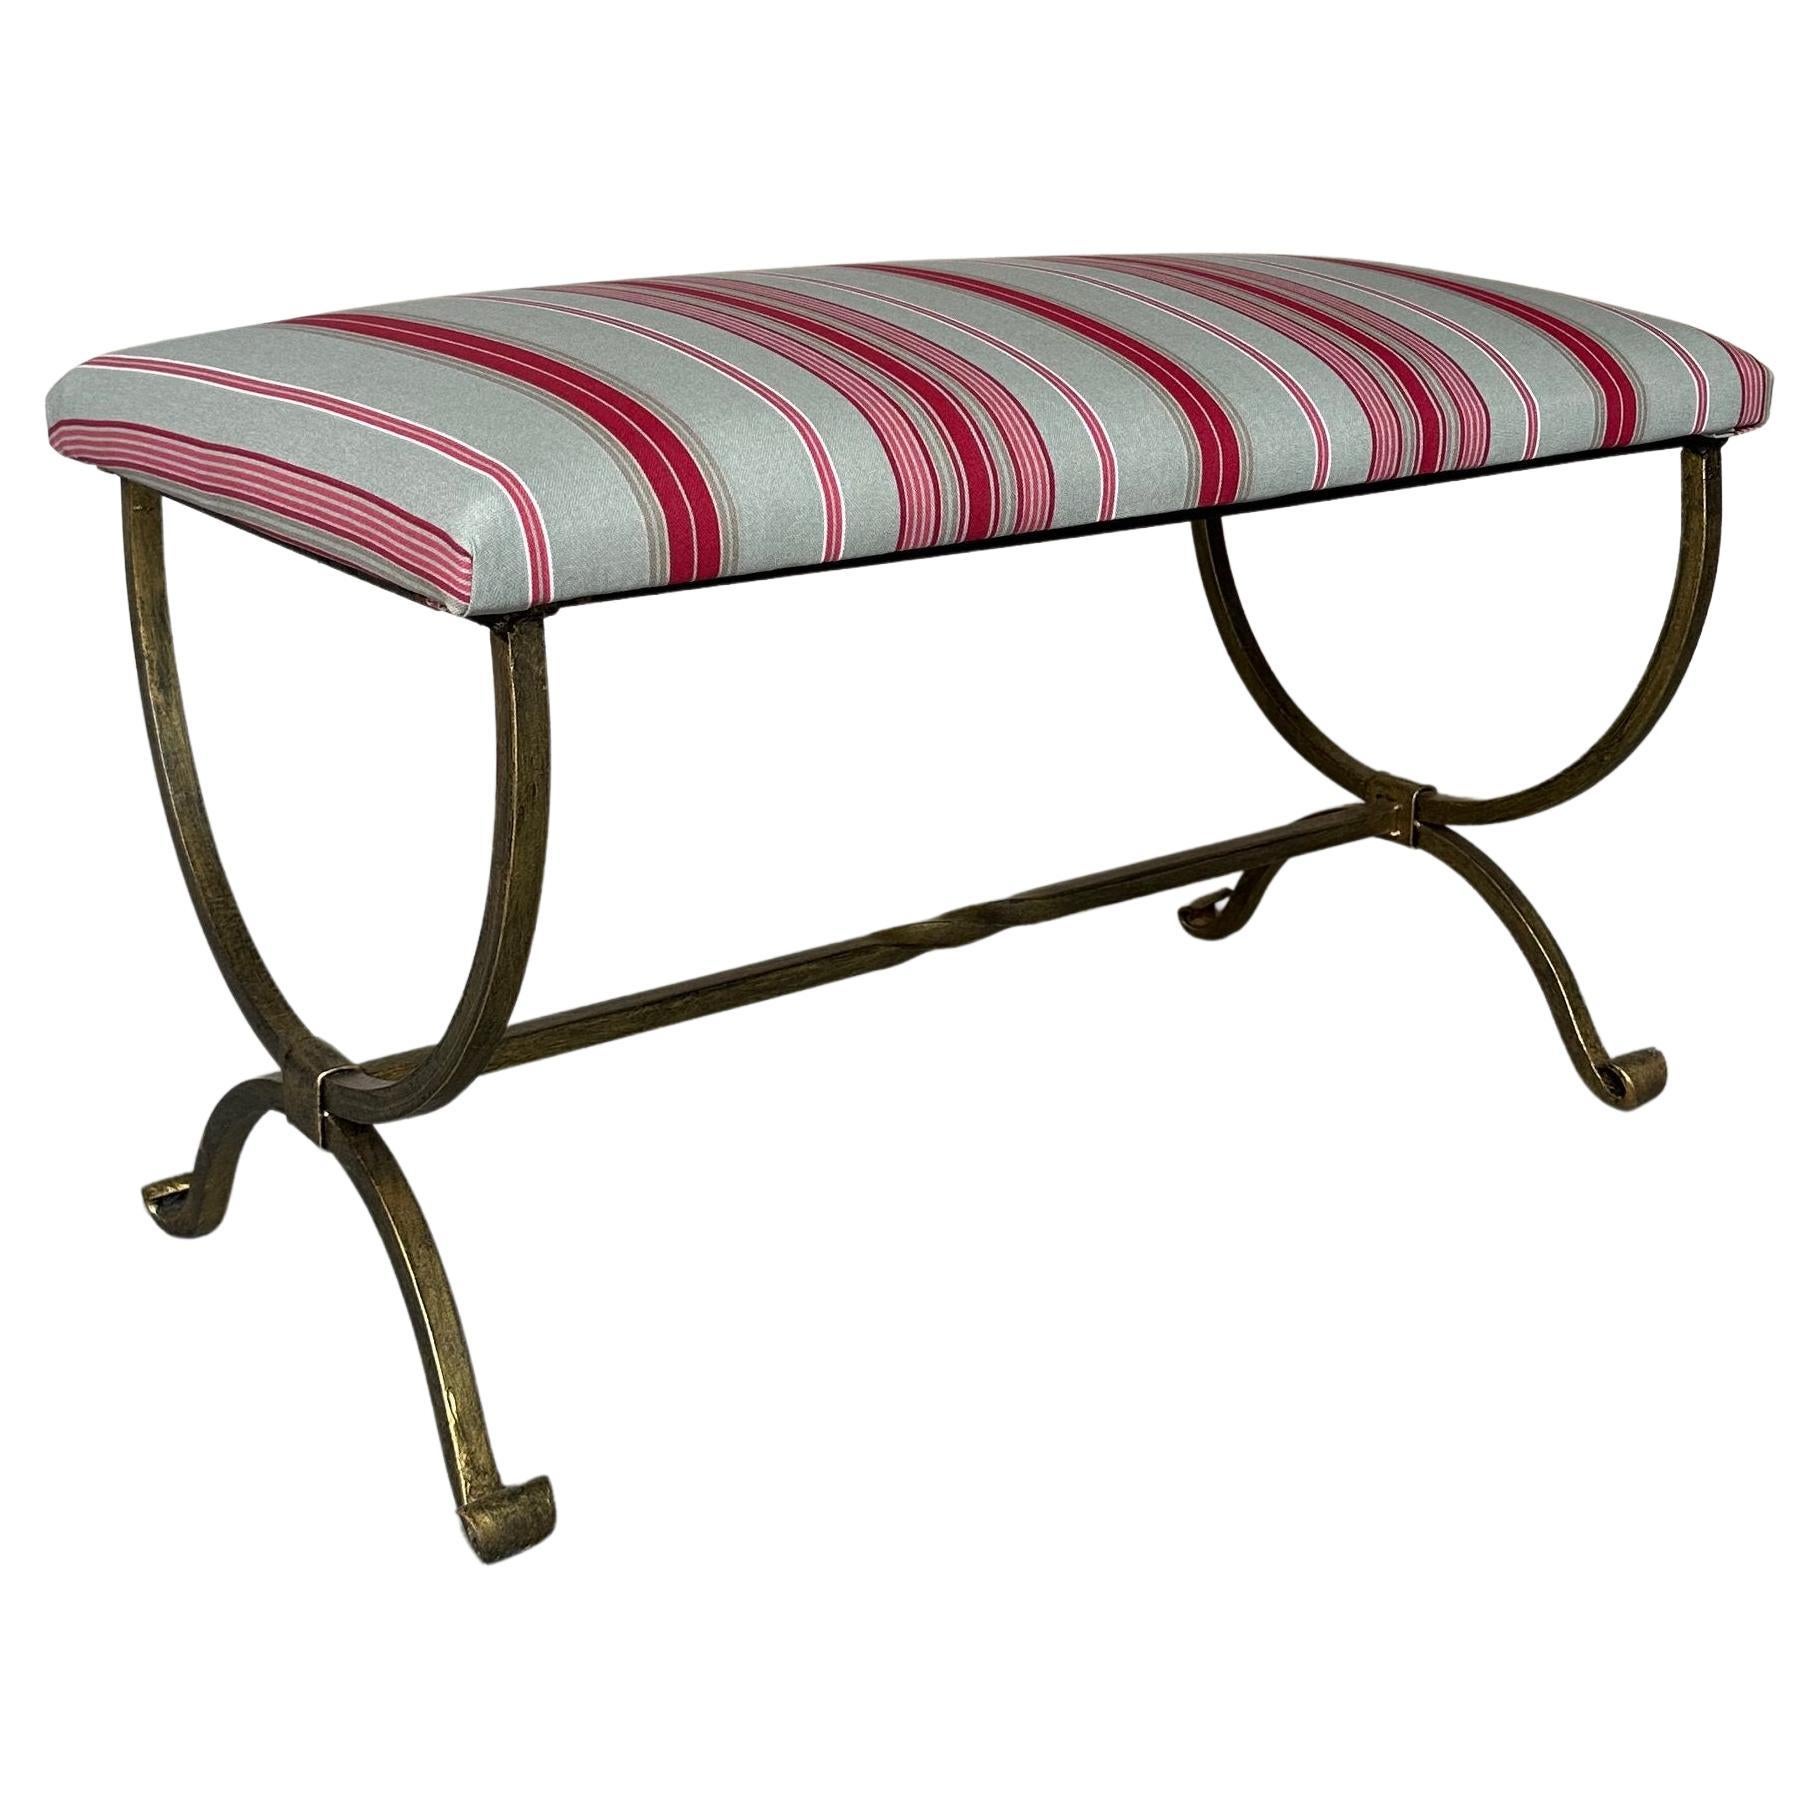 Spanish Iron Bench with Scrolled Legs